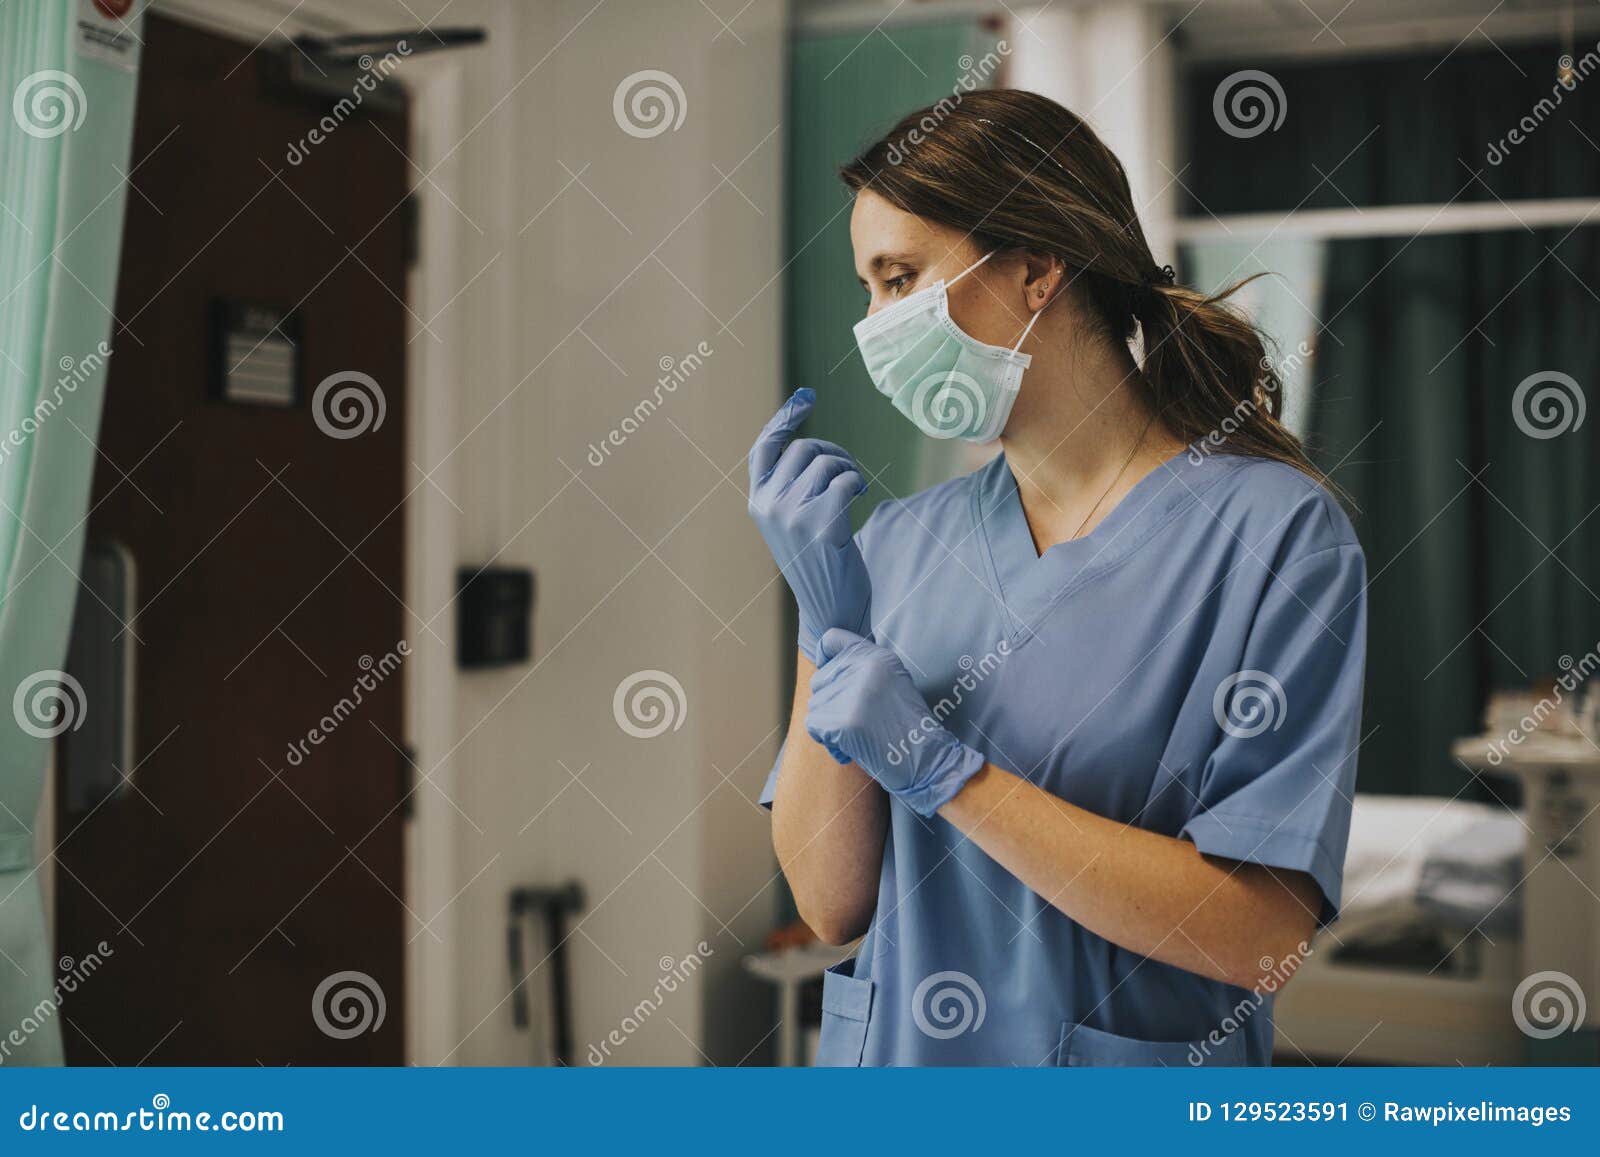 female nurse with a mask putting on gloves